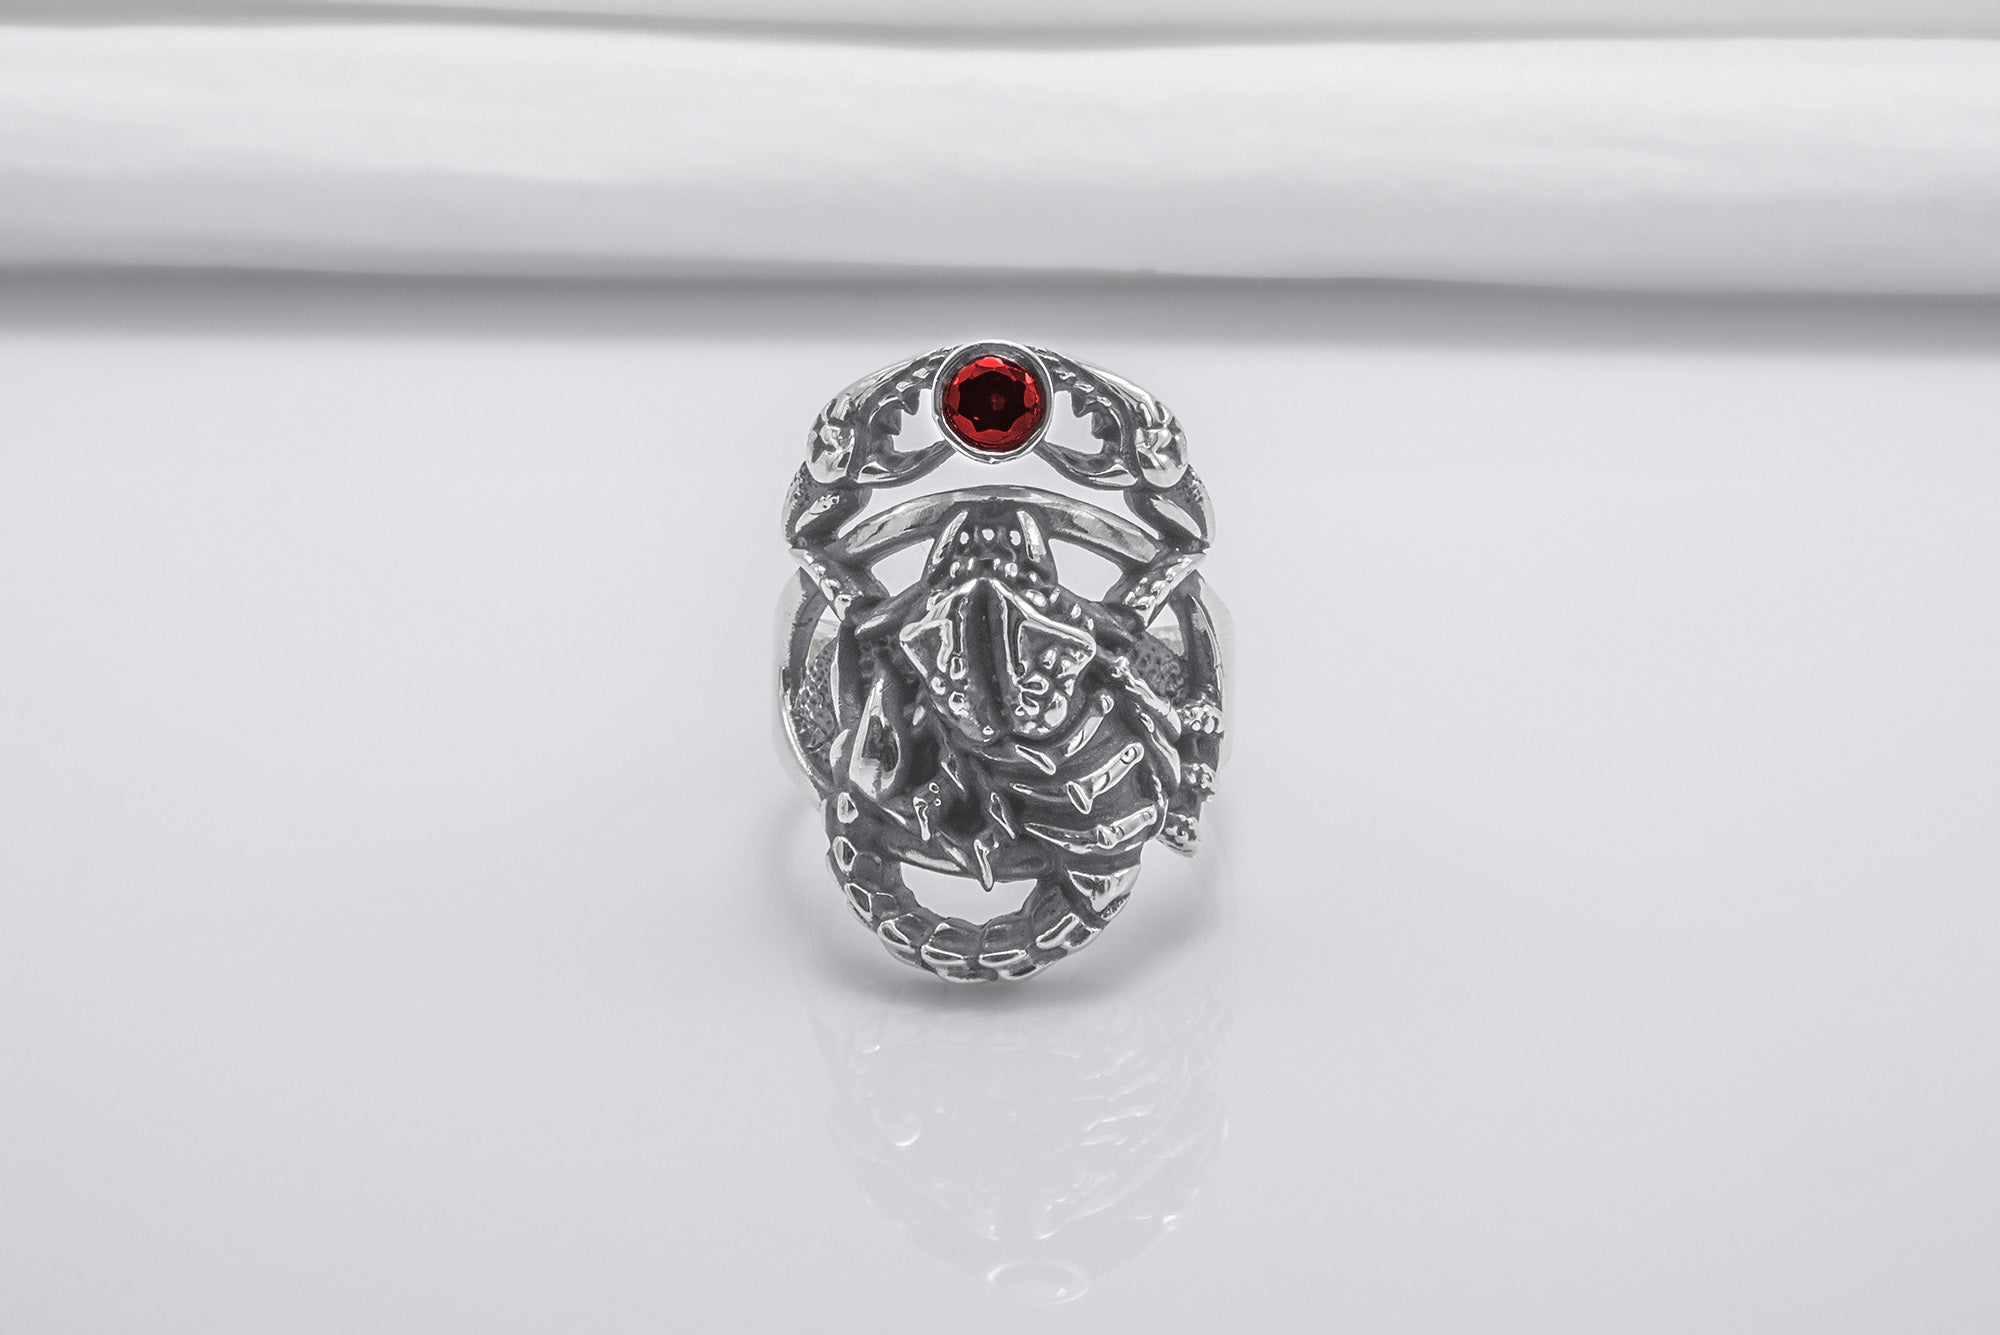 Scorpion Ring Sterling Silver With Red Gem, Handmade Jewelry